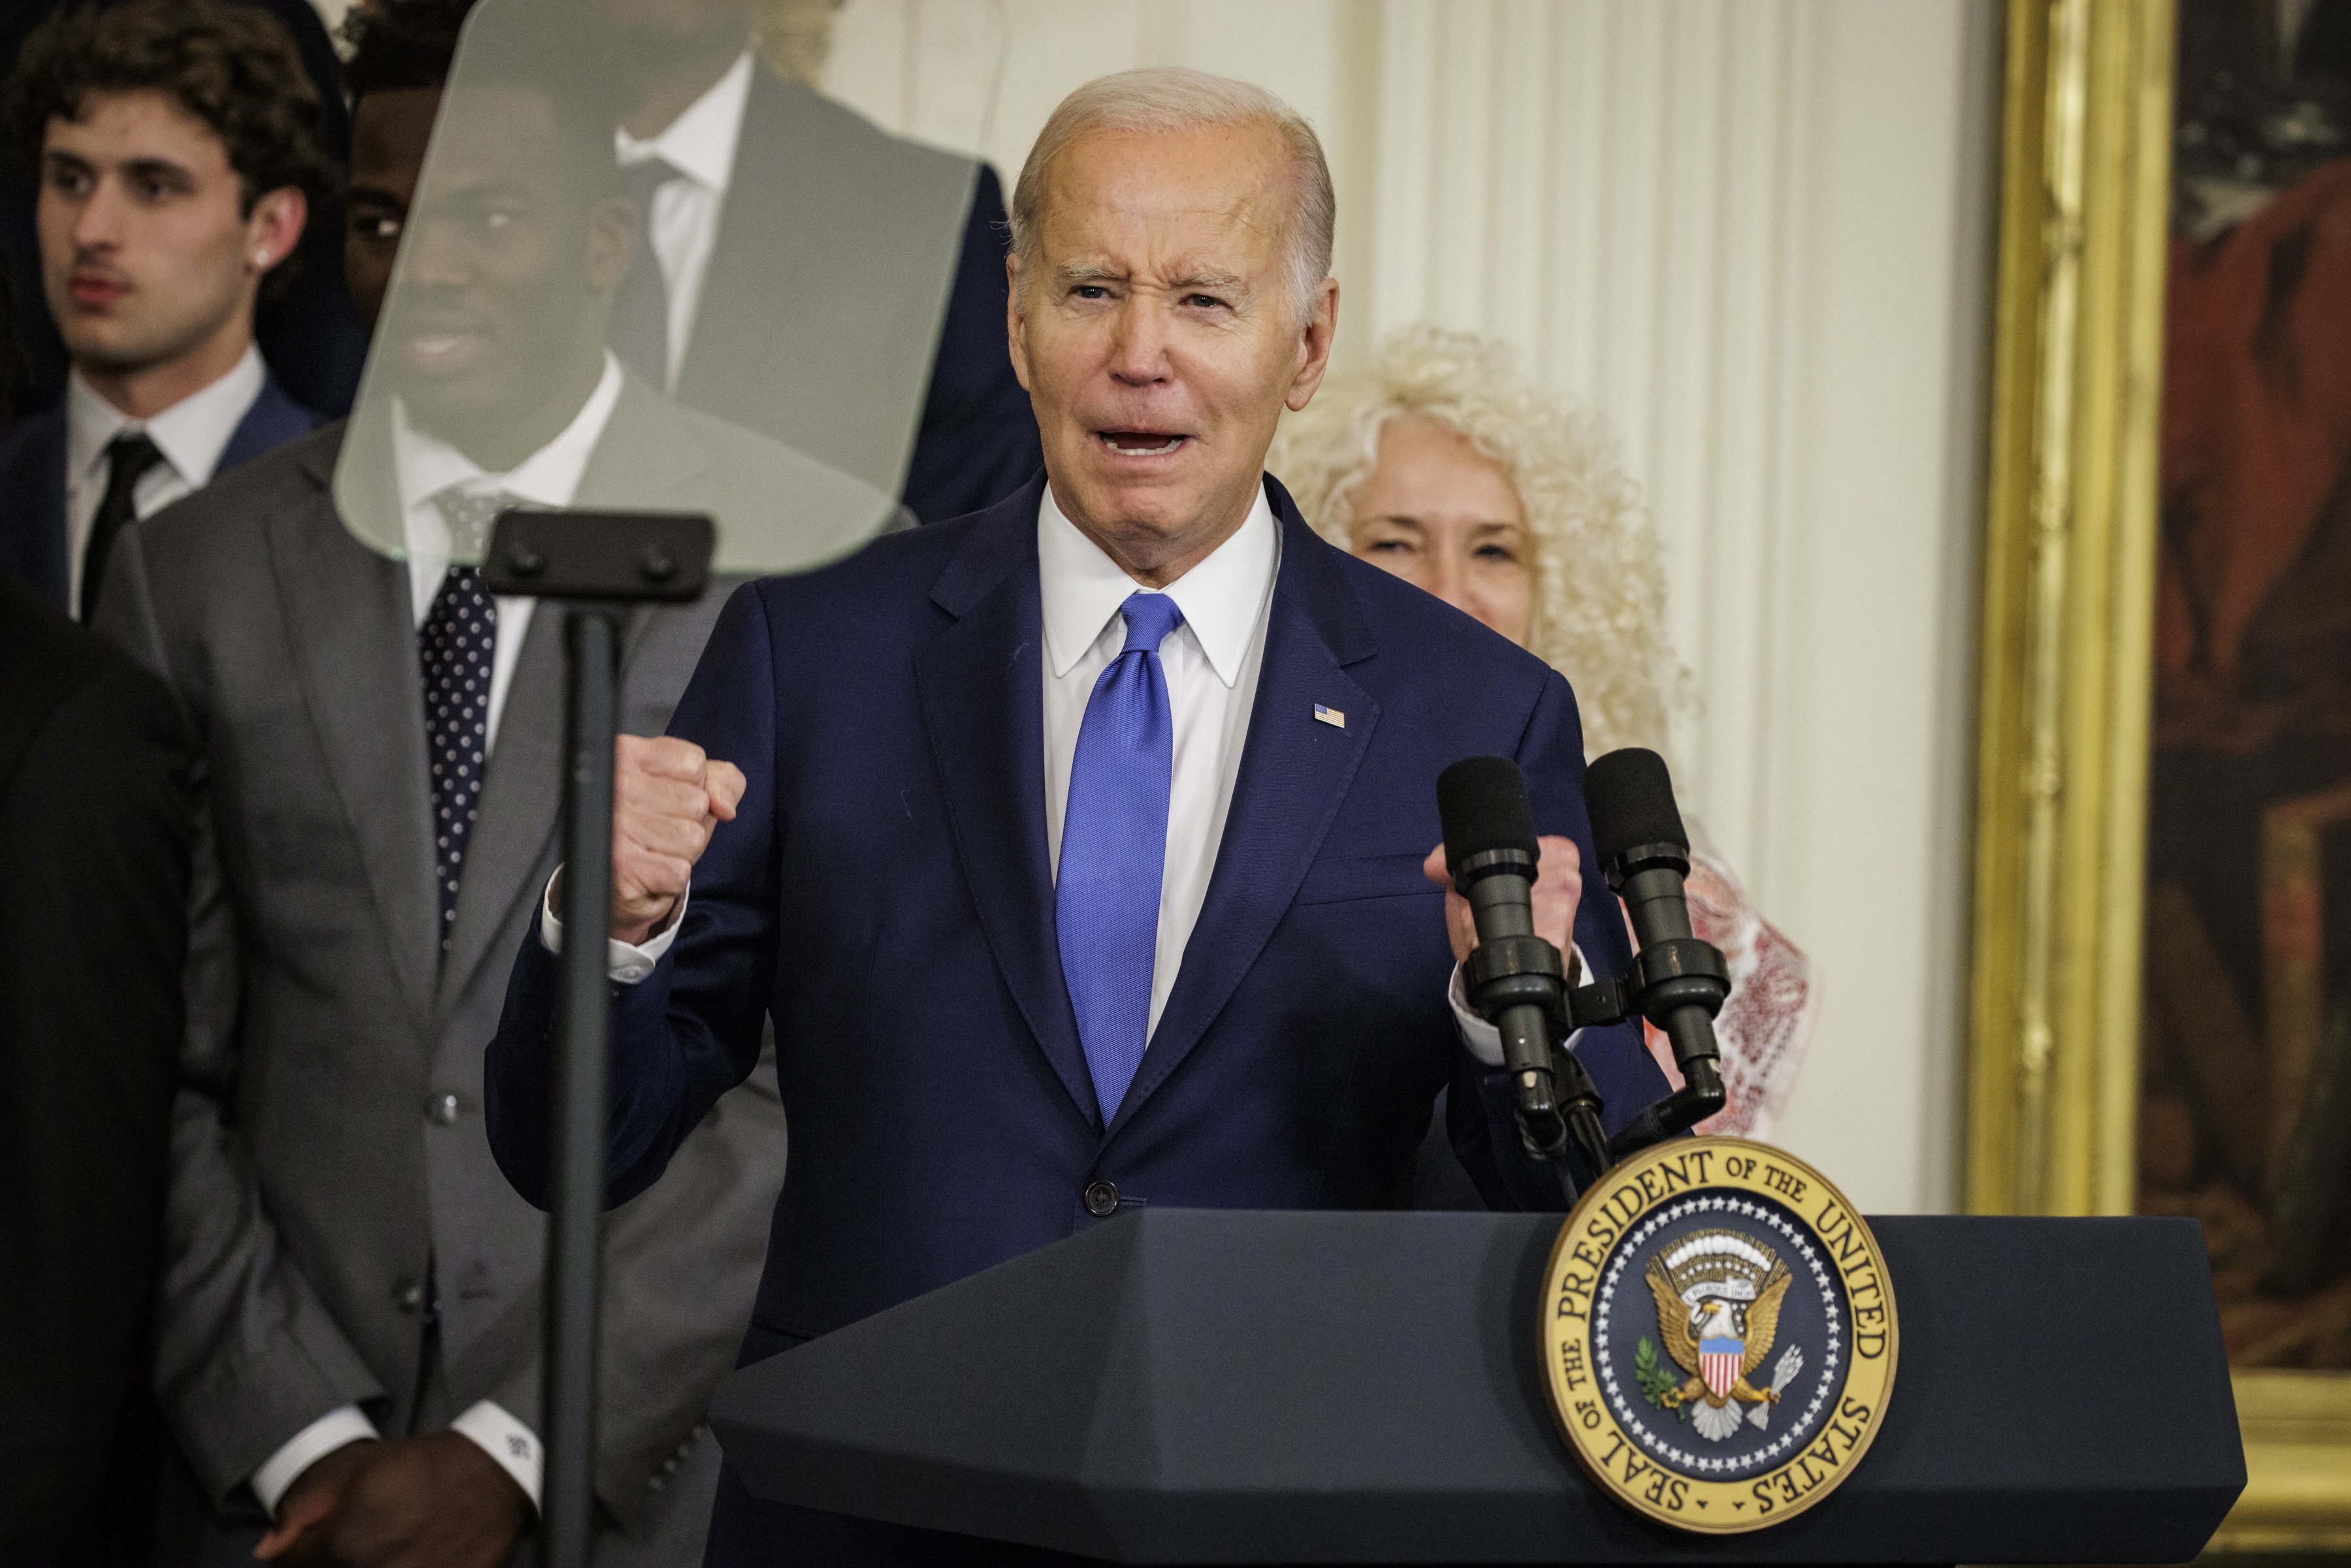 US President Joe Biden speaks during an event in the East Room of the White House on Friday. Photo: EPA-EFE